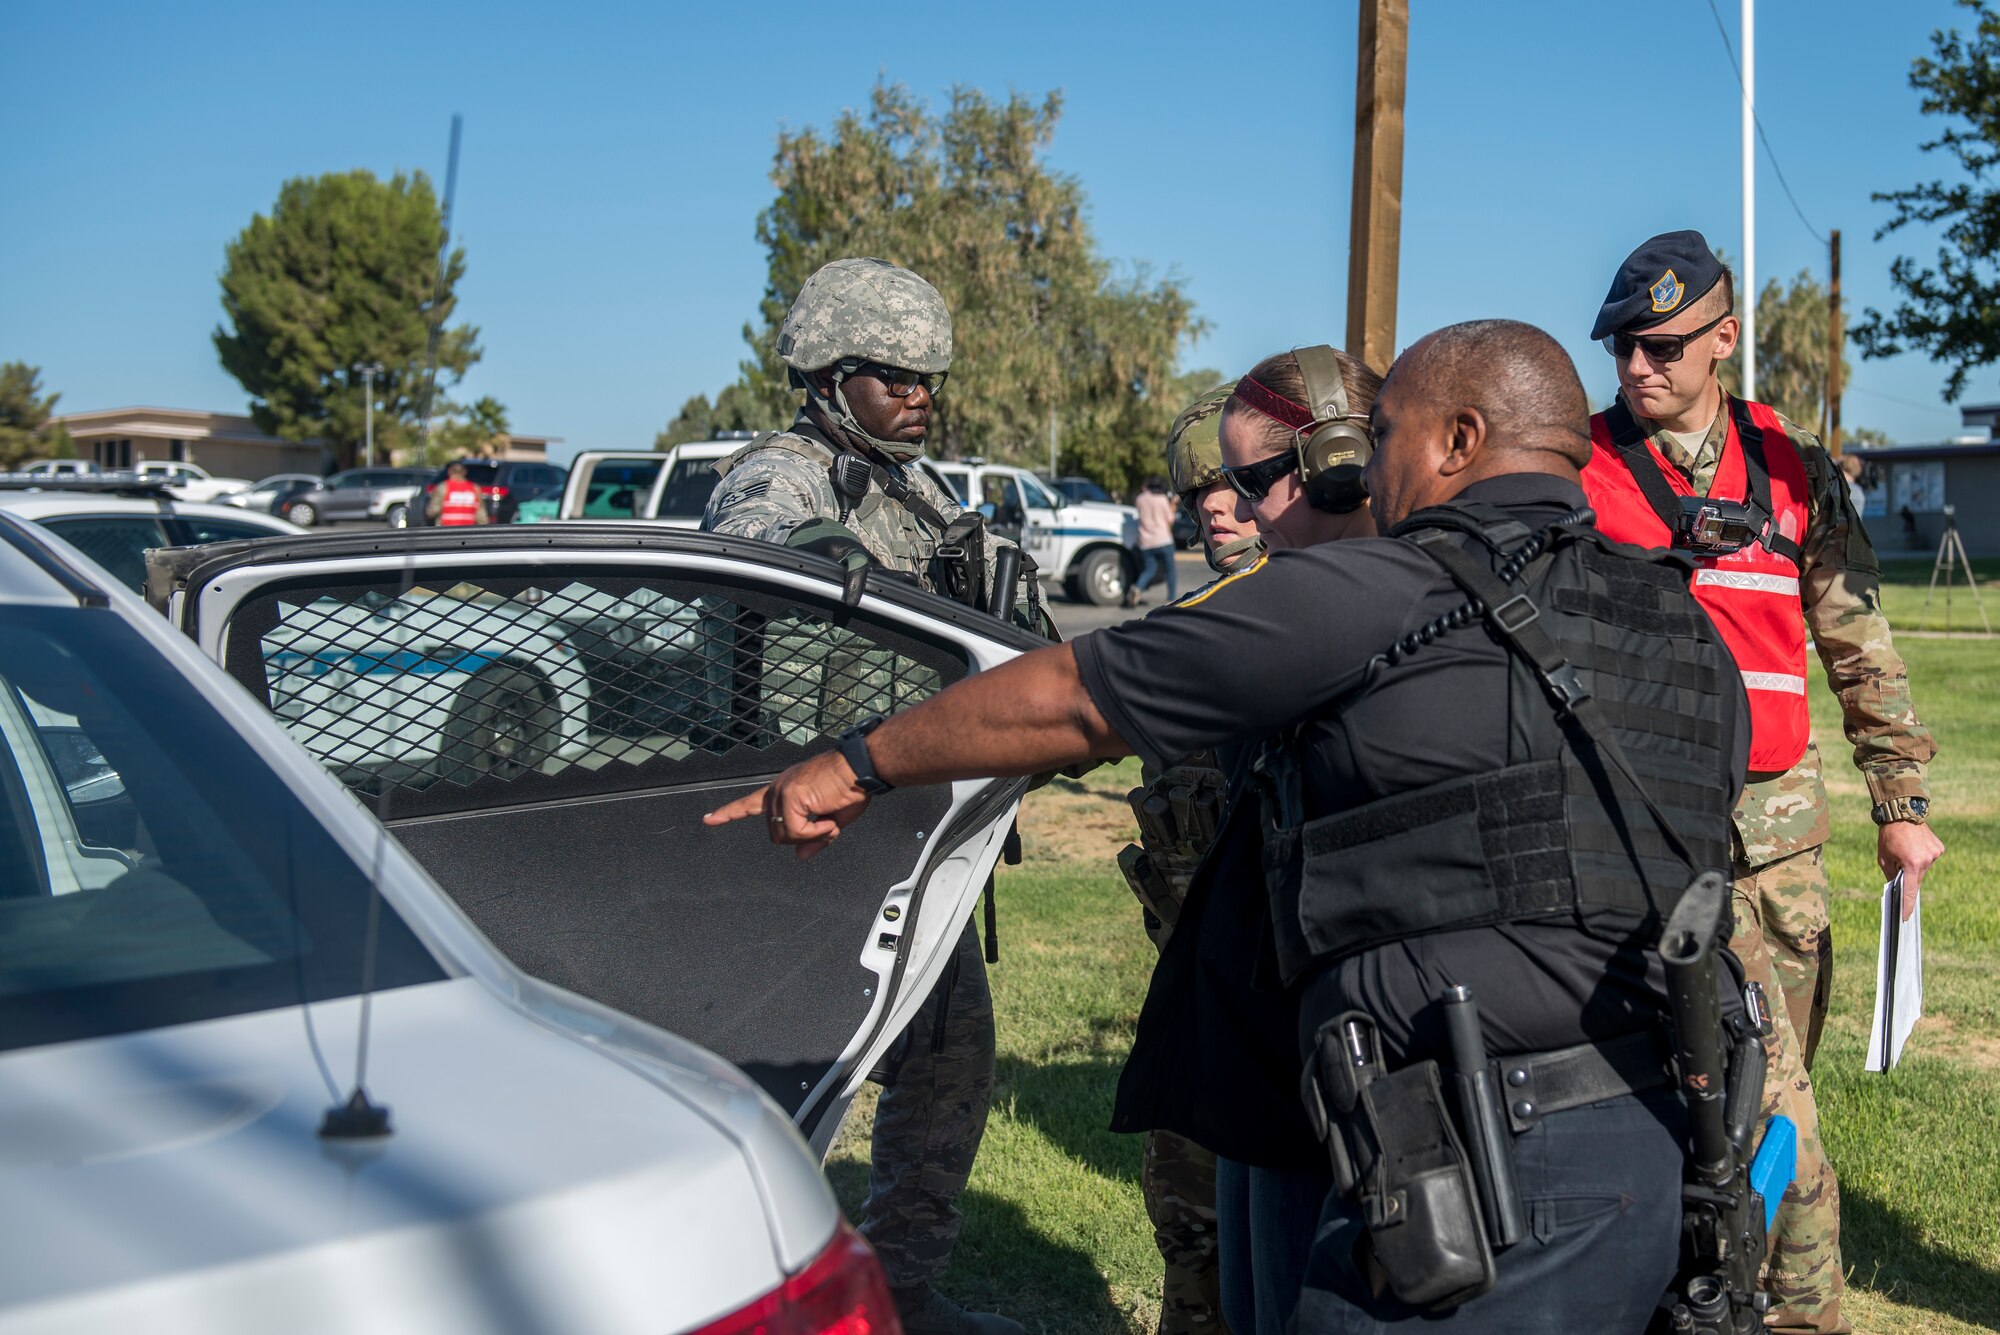 Members of the 412th Security Forces Squadron place a “suspect” into the back of squad car during an active-shooter exercise at Edwards Air Force Base, California, Aug. 9. (U.S. Air Force photo by Richard Gonzales)